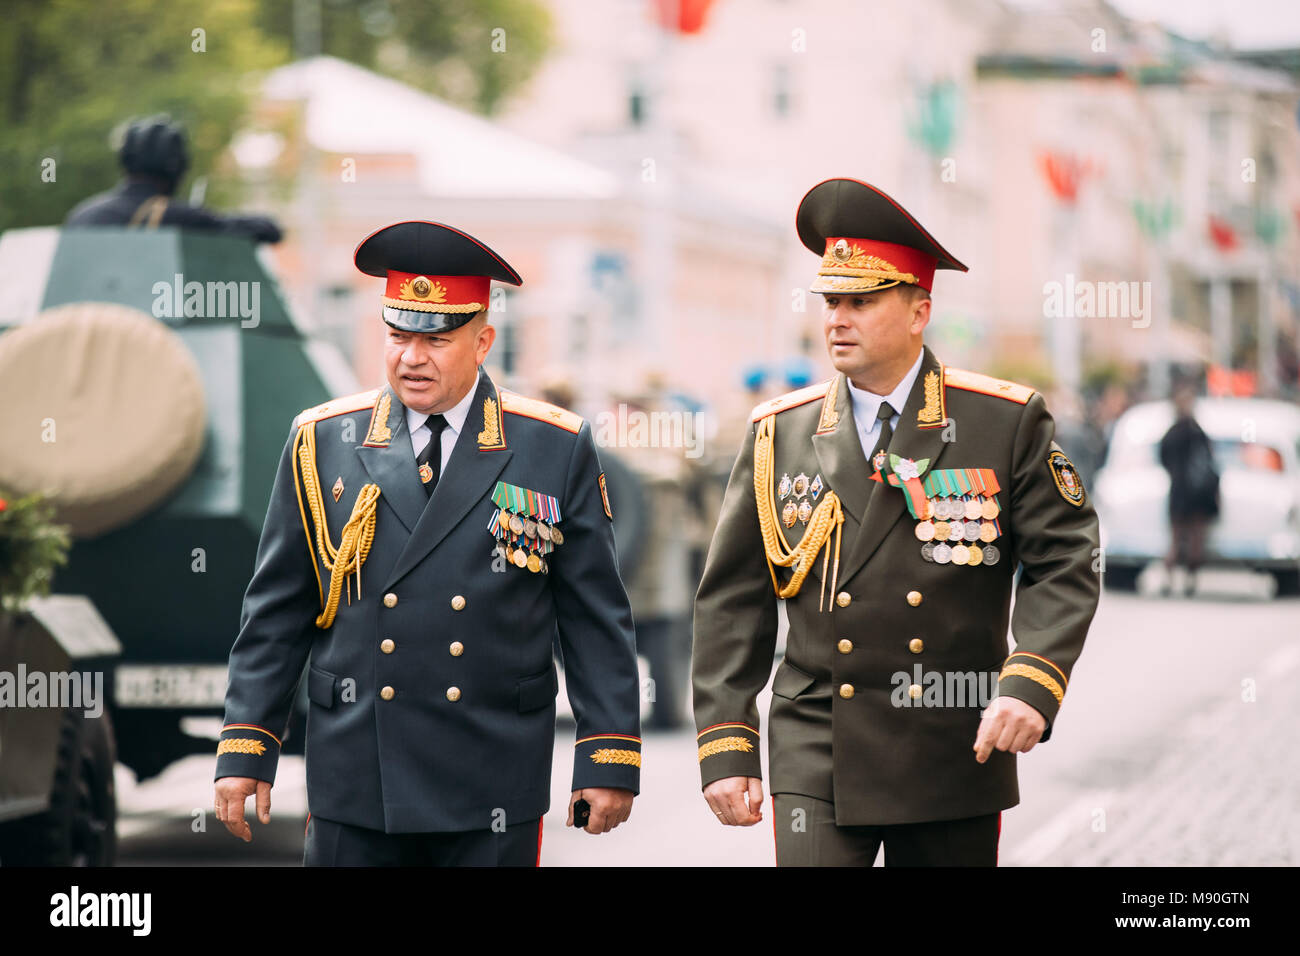 Gomel, Belarus. Chief Of Militia And Officer Take Part In Parade During Celebration Of Victory Day 9 May. Stock Photo